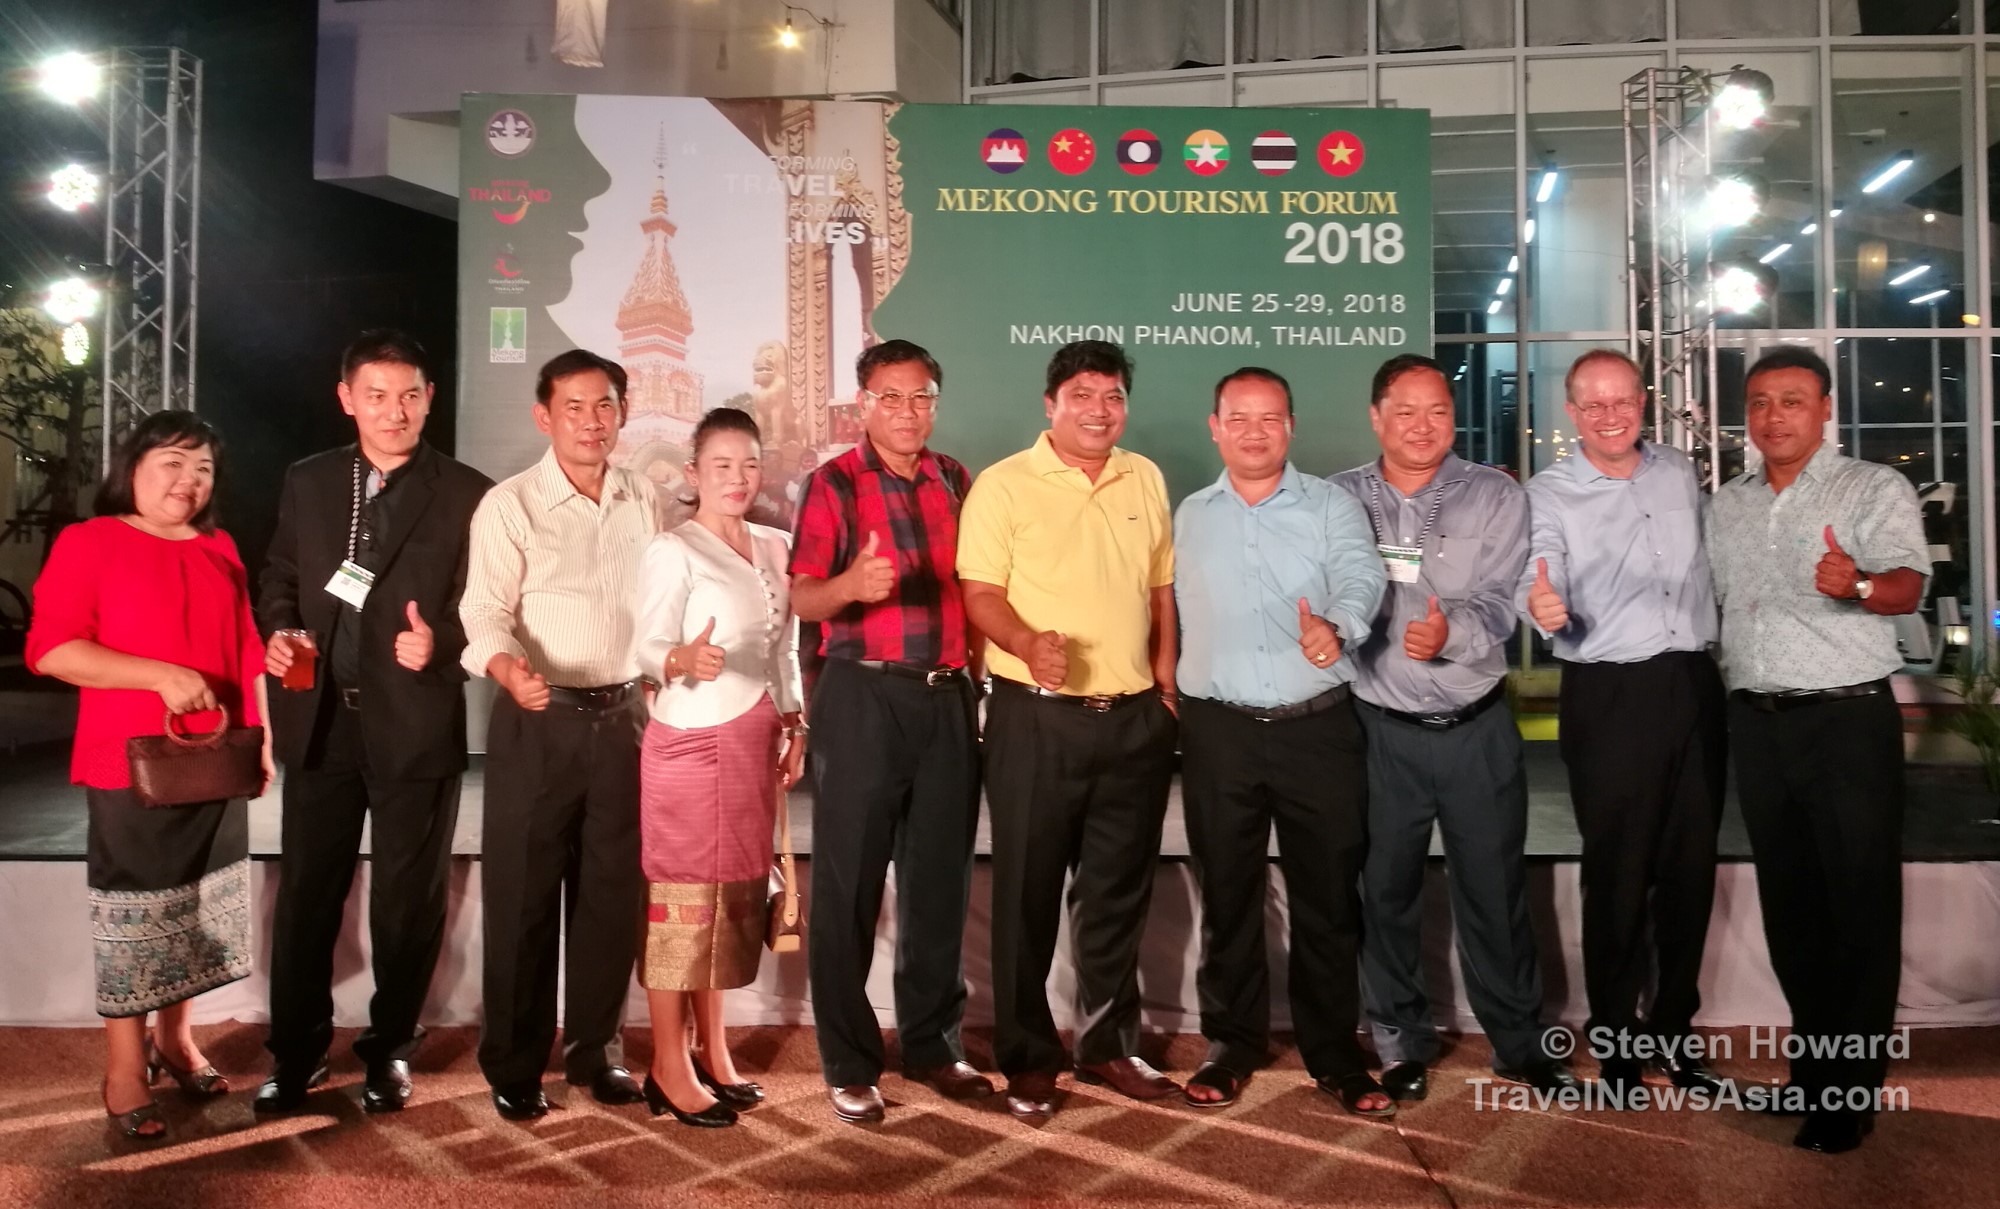 Pictures of Mekong Tourism Forum 2018 in Nakhon Phanom, Thailand